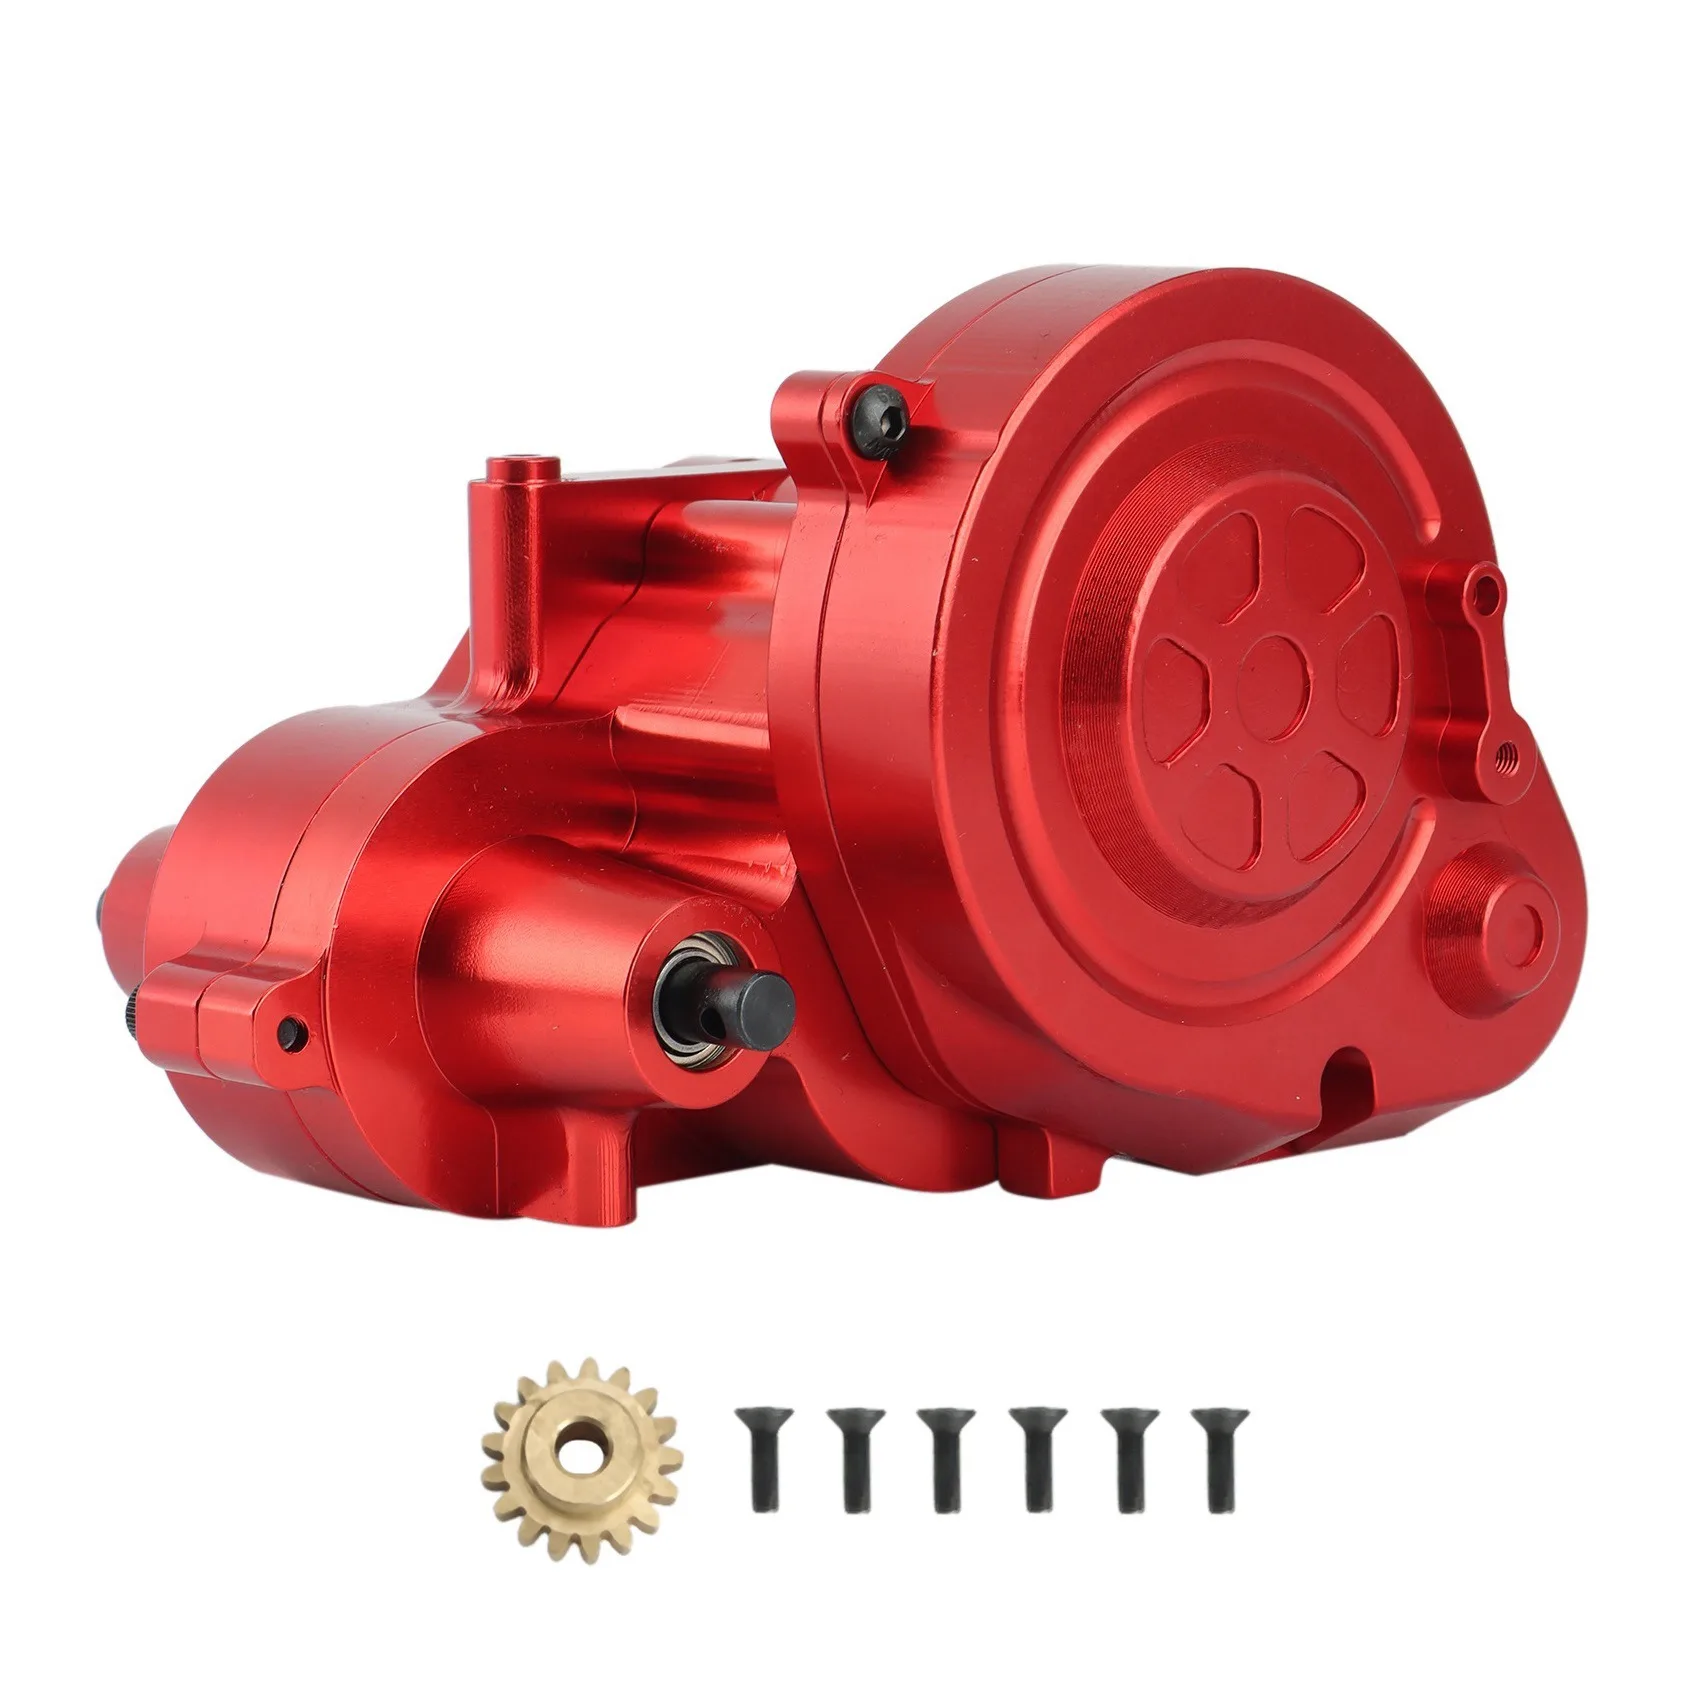 

Complete Metal Gearbox Transmission Box with Gear for Axial RBX10 Ryft 1/10 RC Crawler Car Upgrade Parts Red